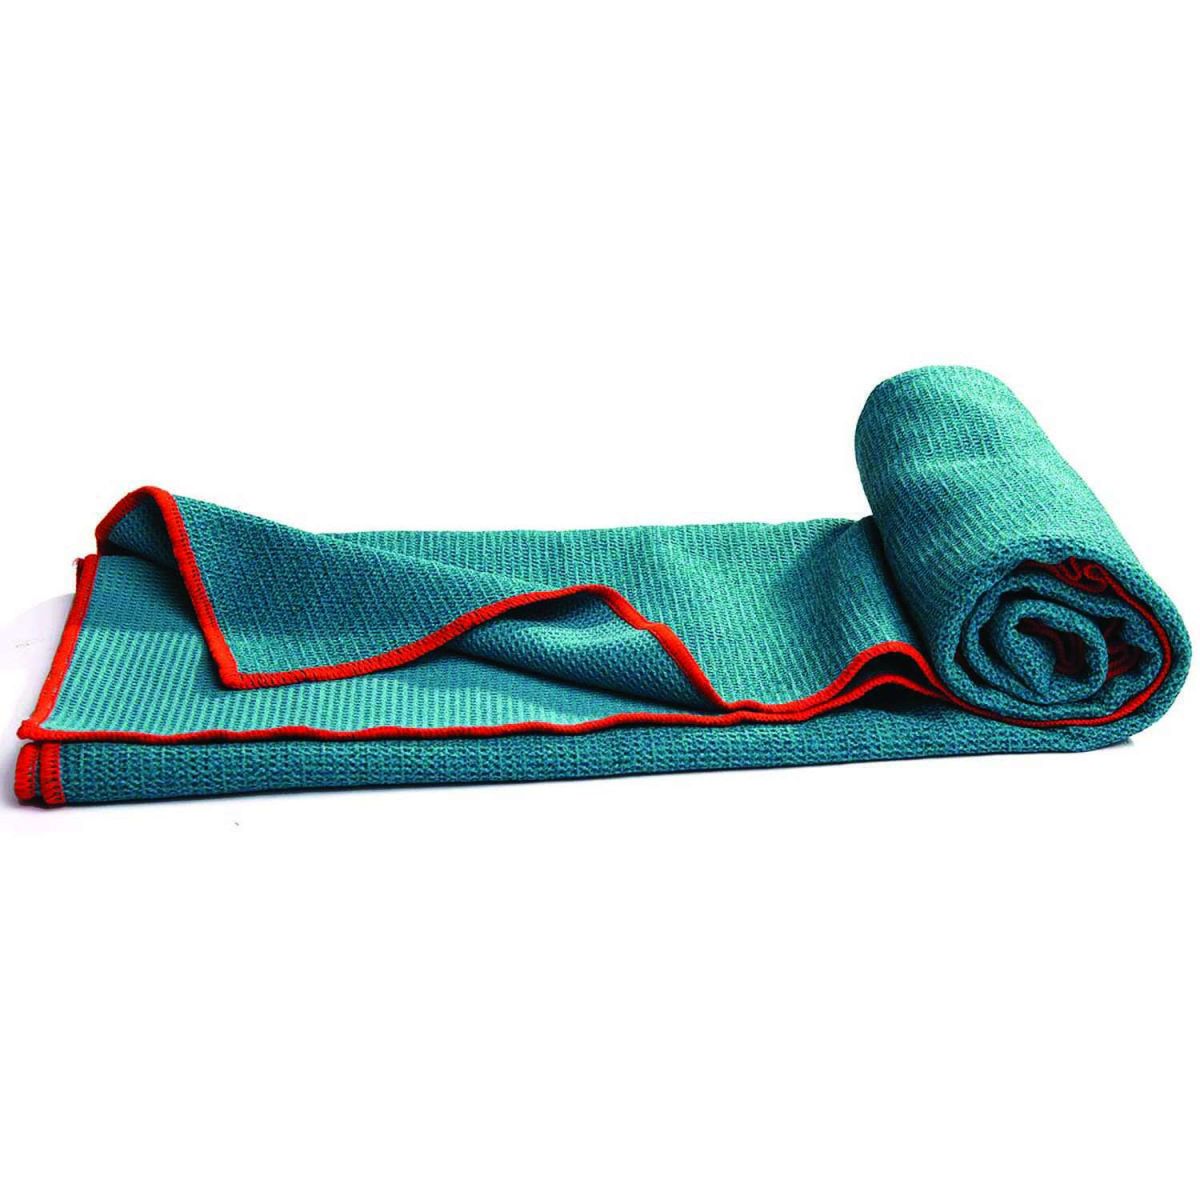  Vive Non Slip Yoga Towel & Hand Towel - Microfiber, Quick  Drying, Washable, Lightweight - Non Slip Grip Hot Pilates Mat- Soft & Large  Sweat Absorbent for Workouts & Safe Exercise 